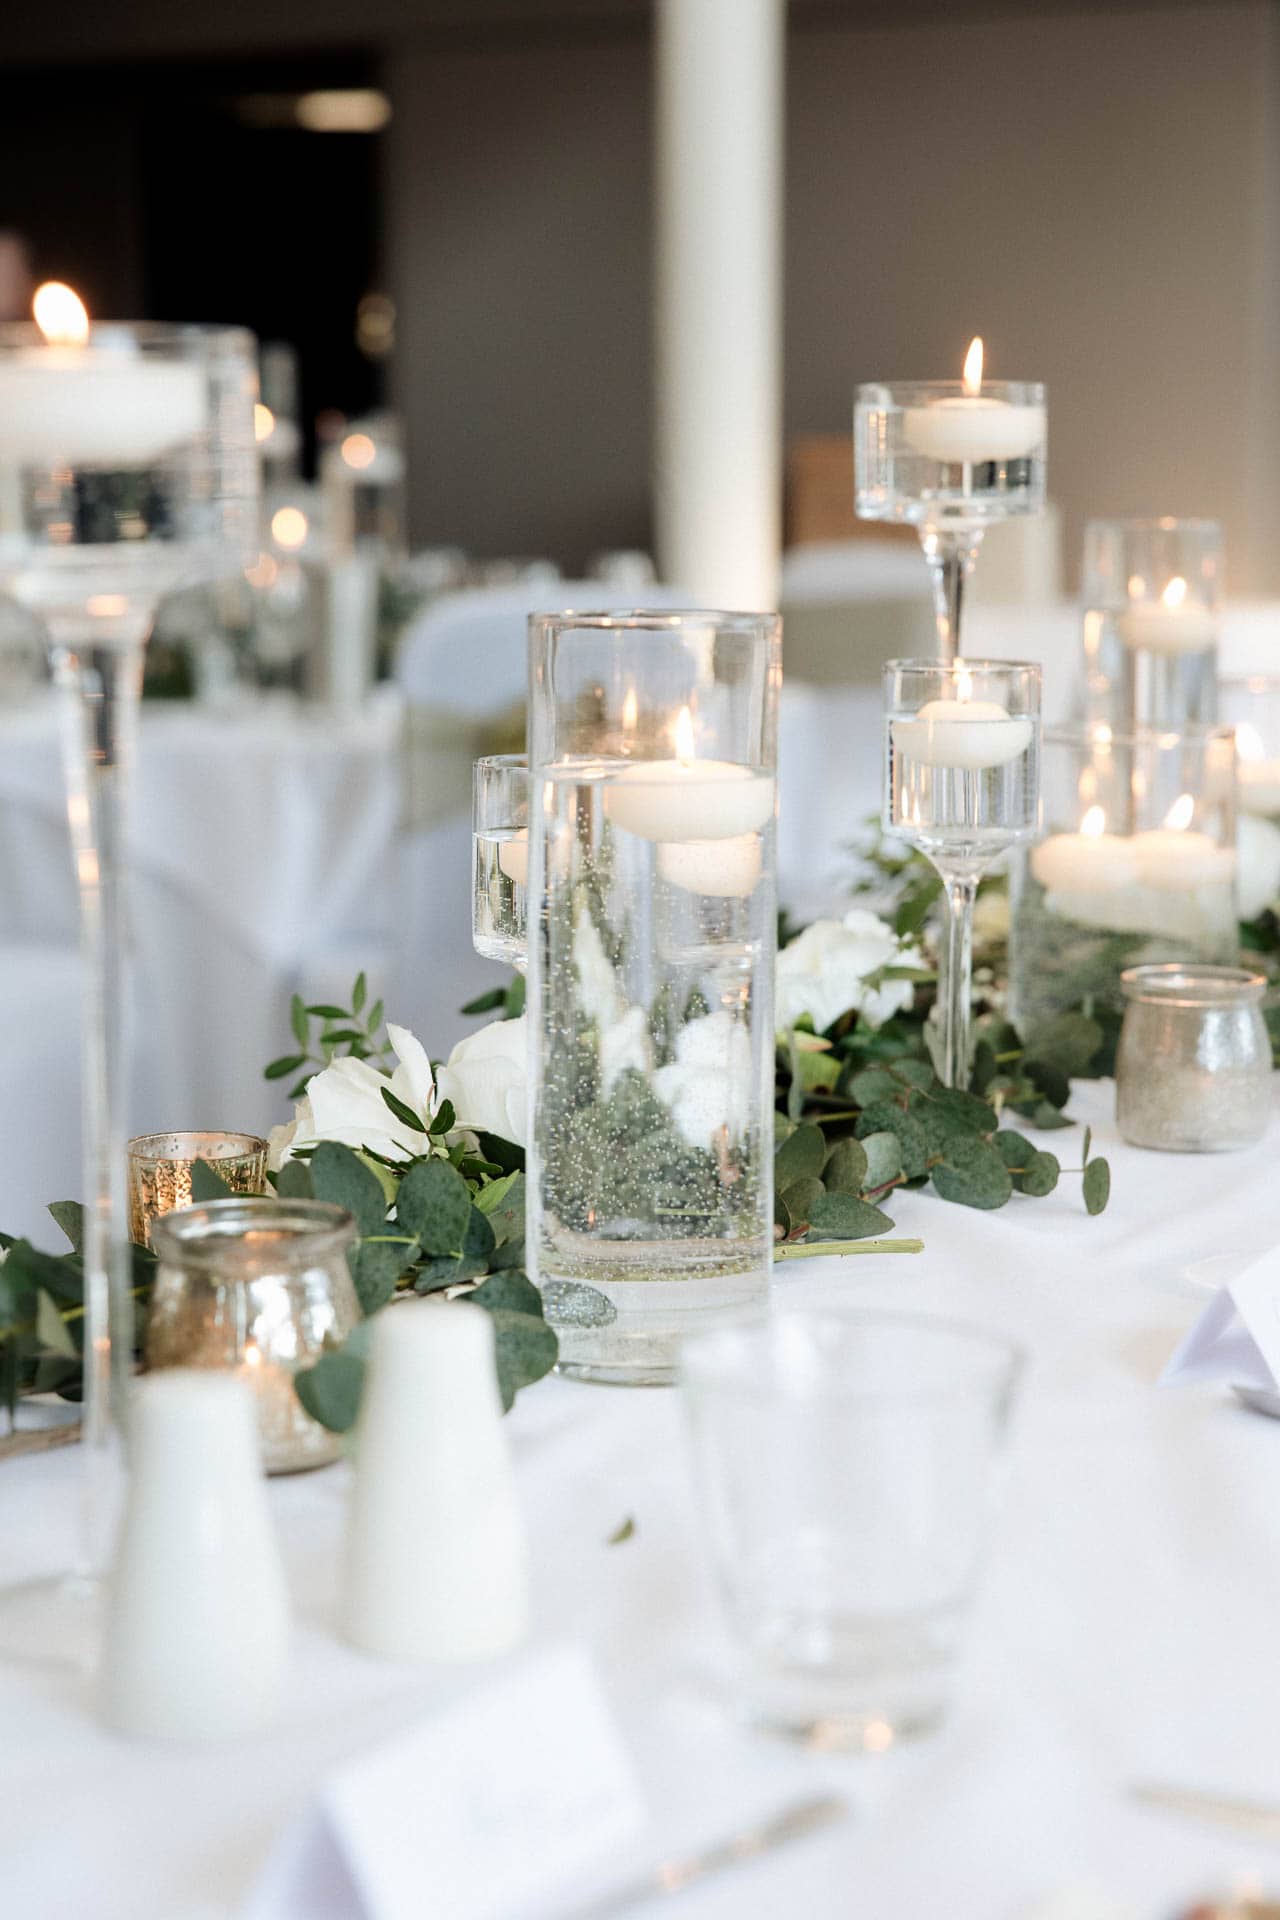 wedding breakfast and speeches at the castlefield rooms manchester wedding venue